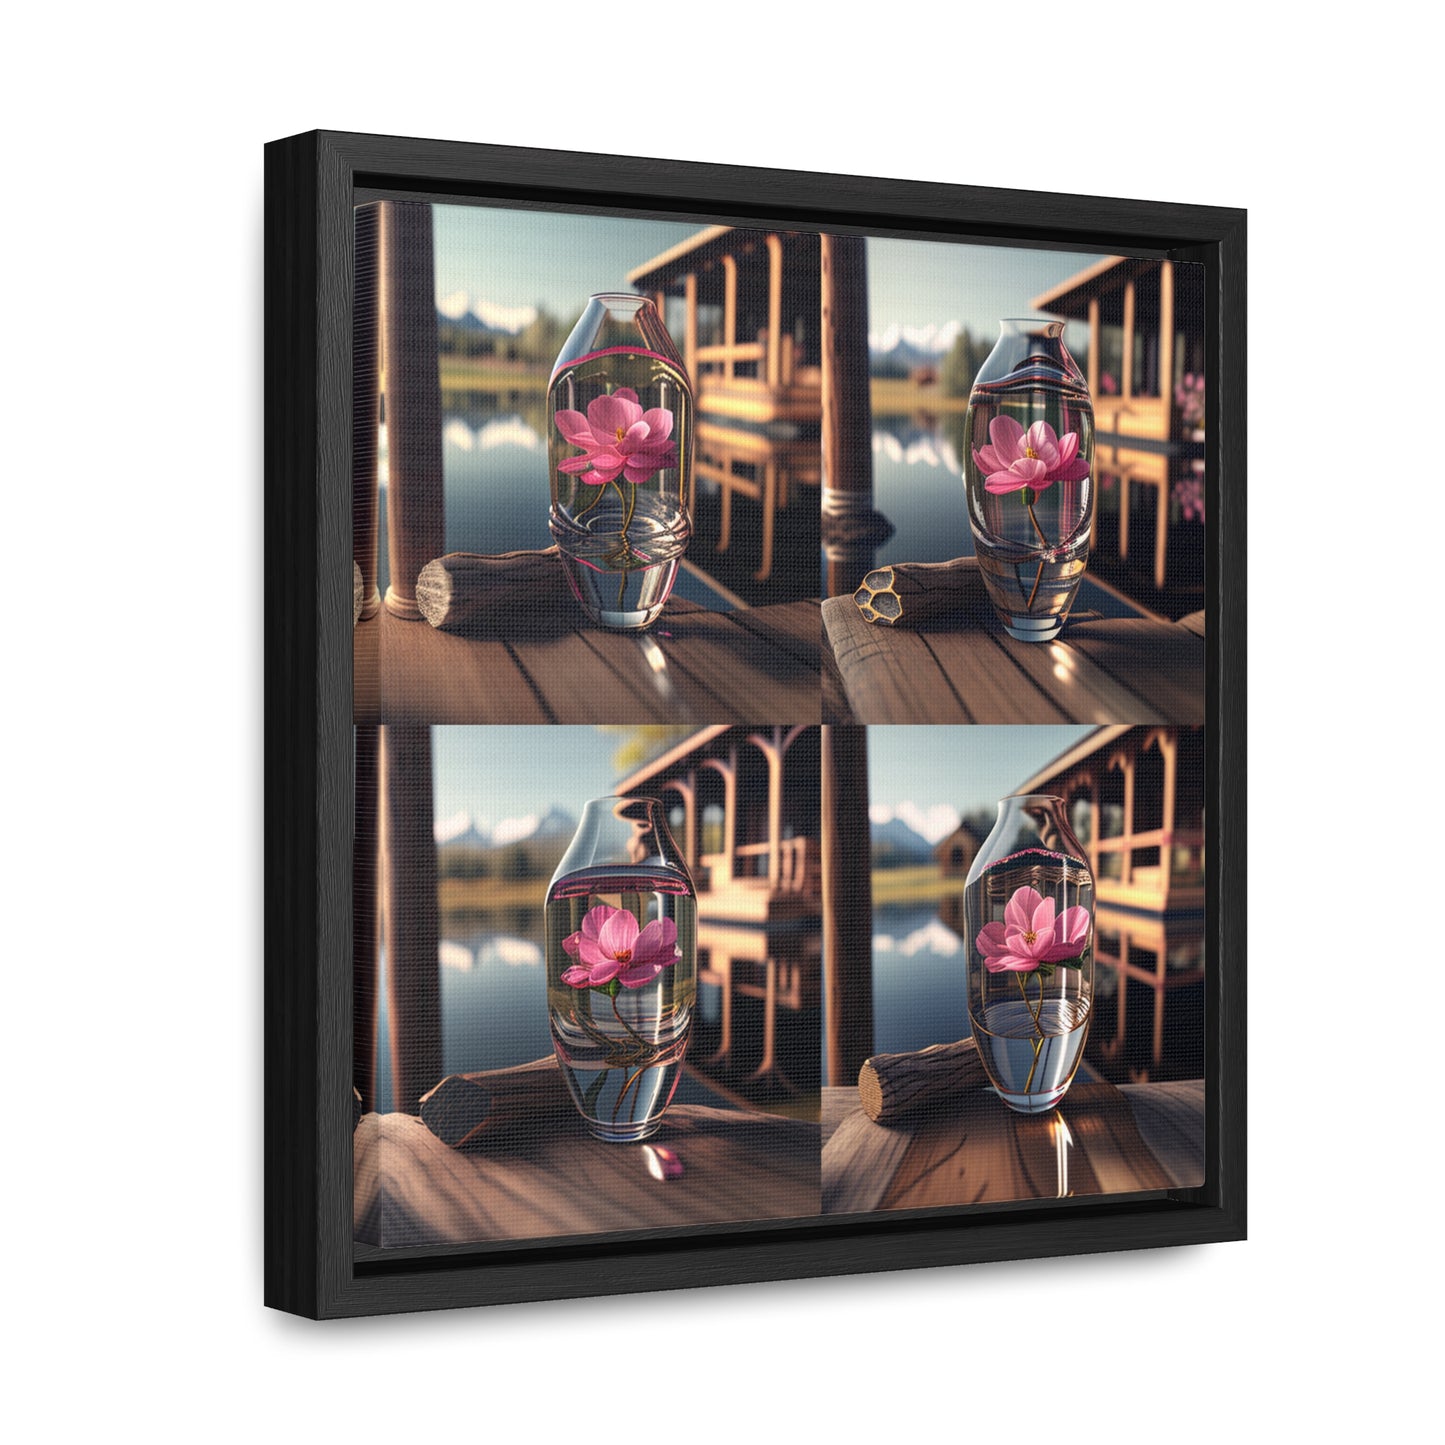 Gallery Canvas Wraps, Square Frame Pink Magnolia 5